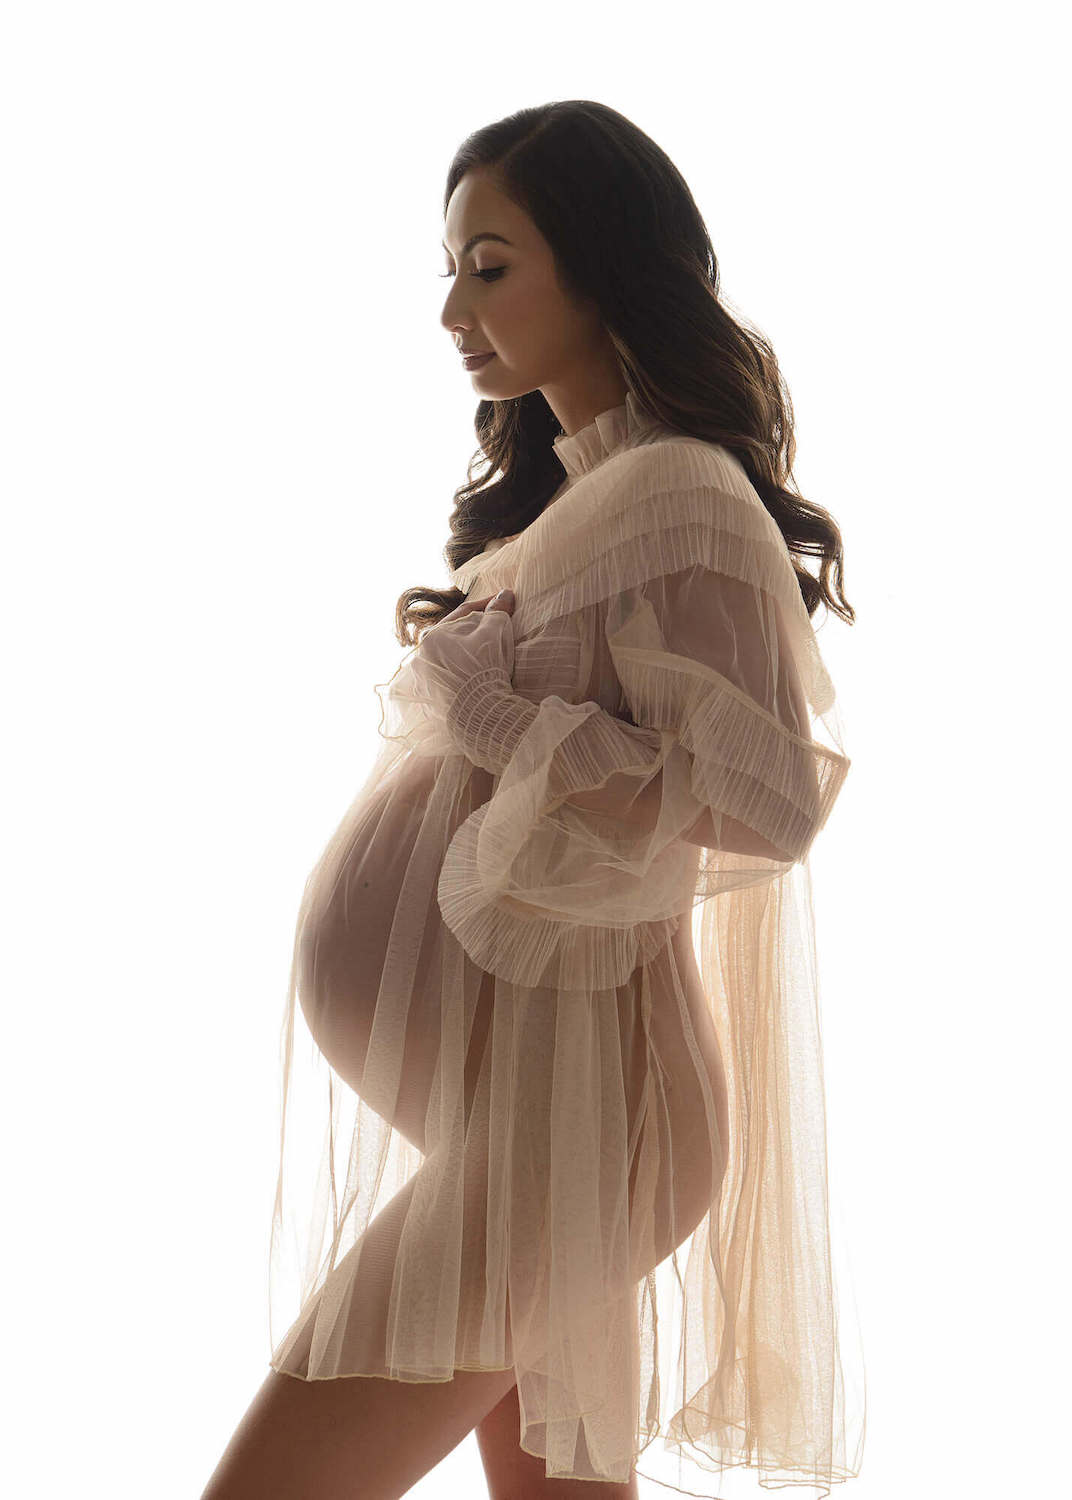 Luxurious maternity photo of brunette woman wearing tulle gown on a solid white backdrop.